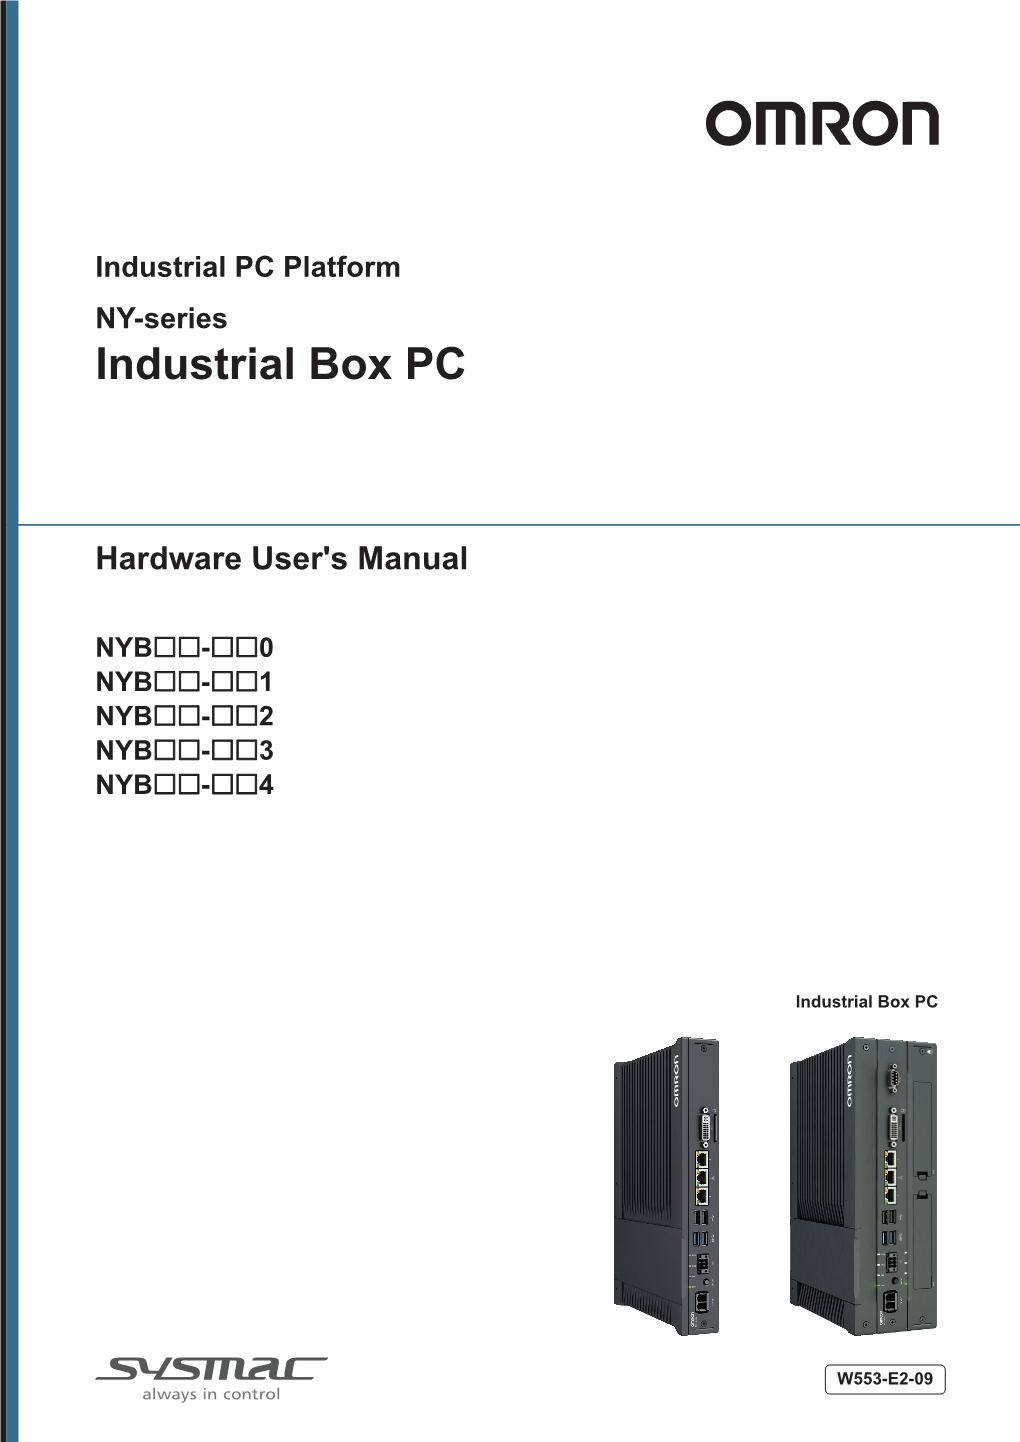 NY-Series Industrial Box PC Hardware User's Manual (W553) 1 Introduction